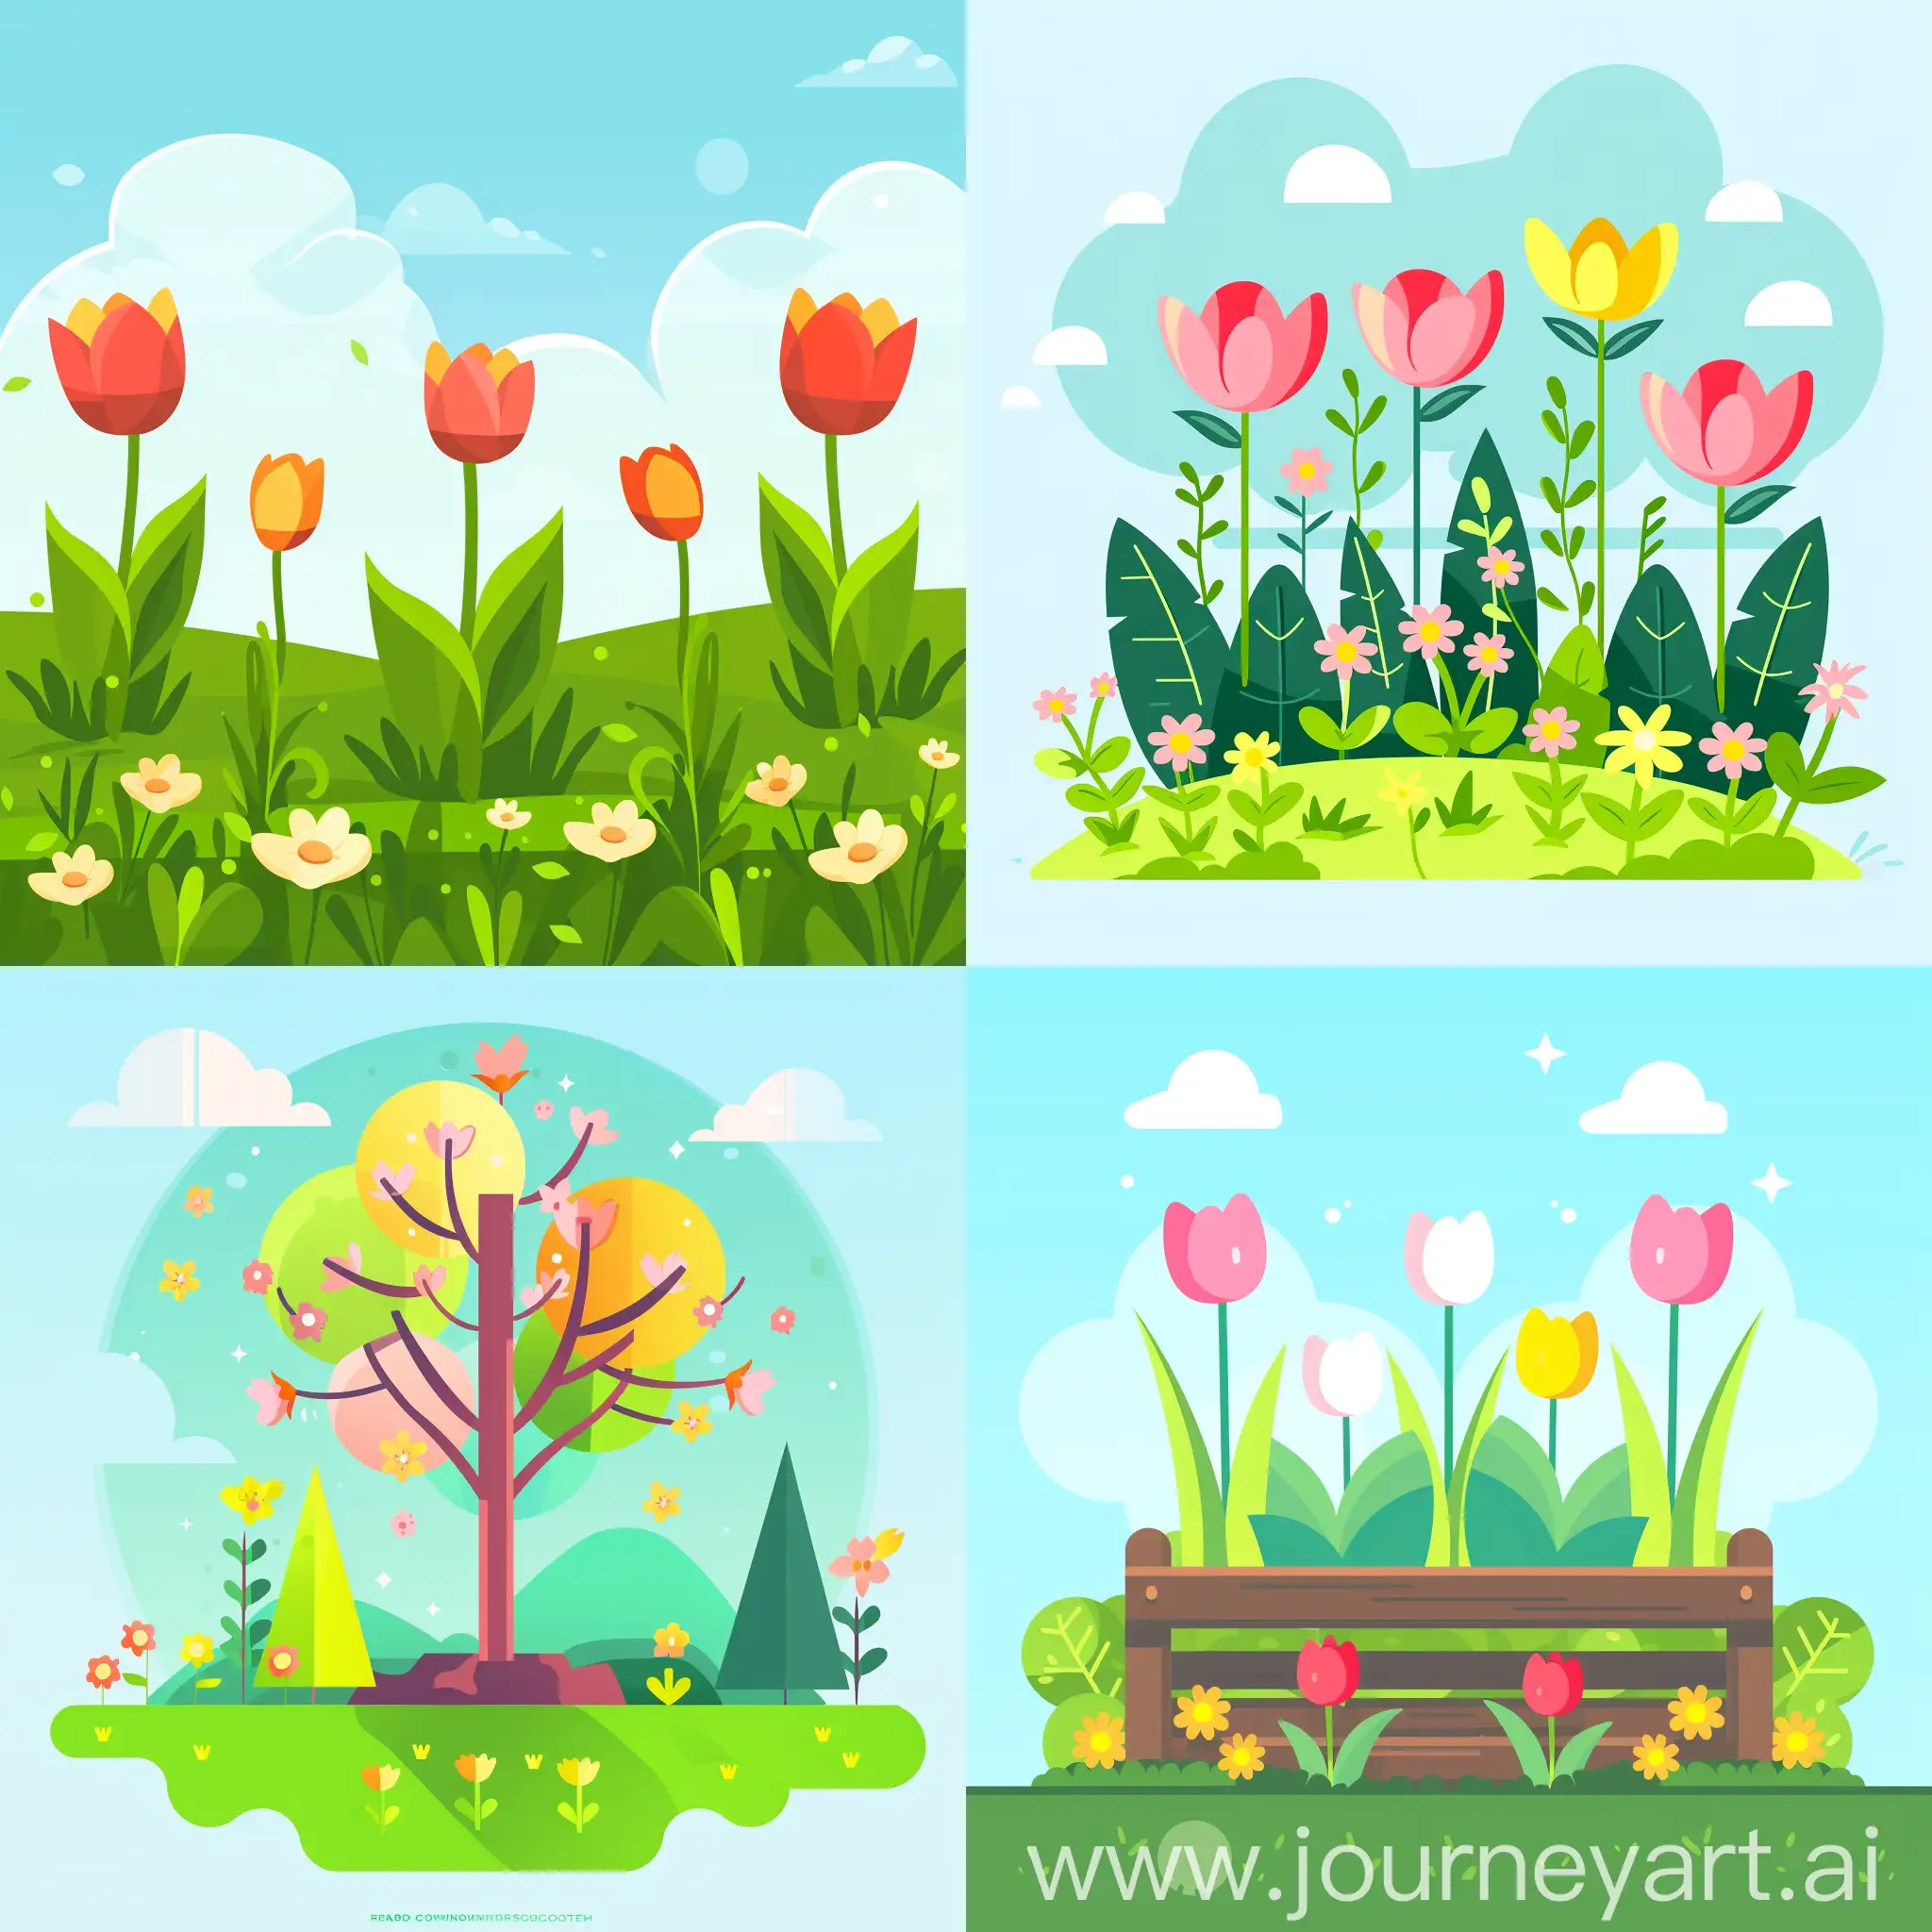 Colorful-Spring-Illustration-Vibrant-Flowers-in-High-Definition-Flat-Style